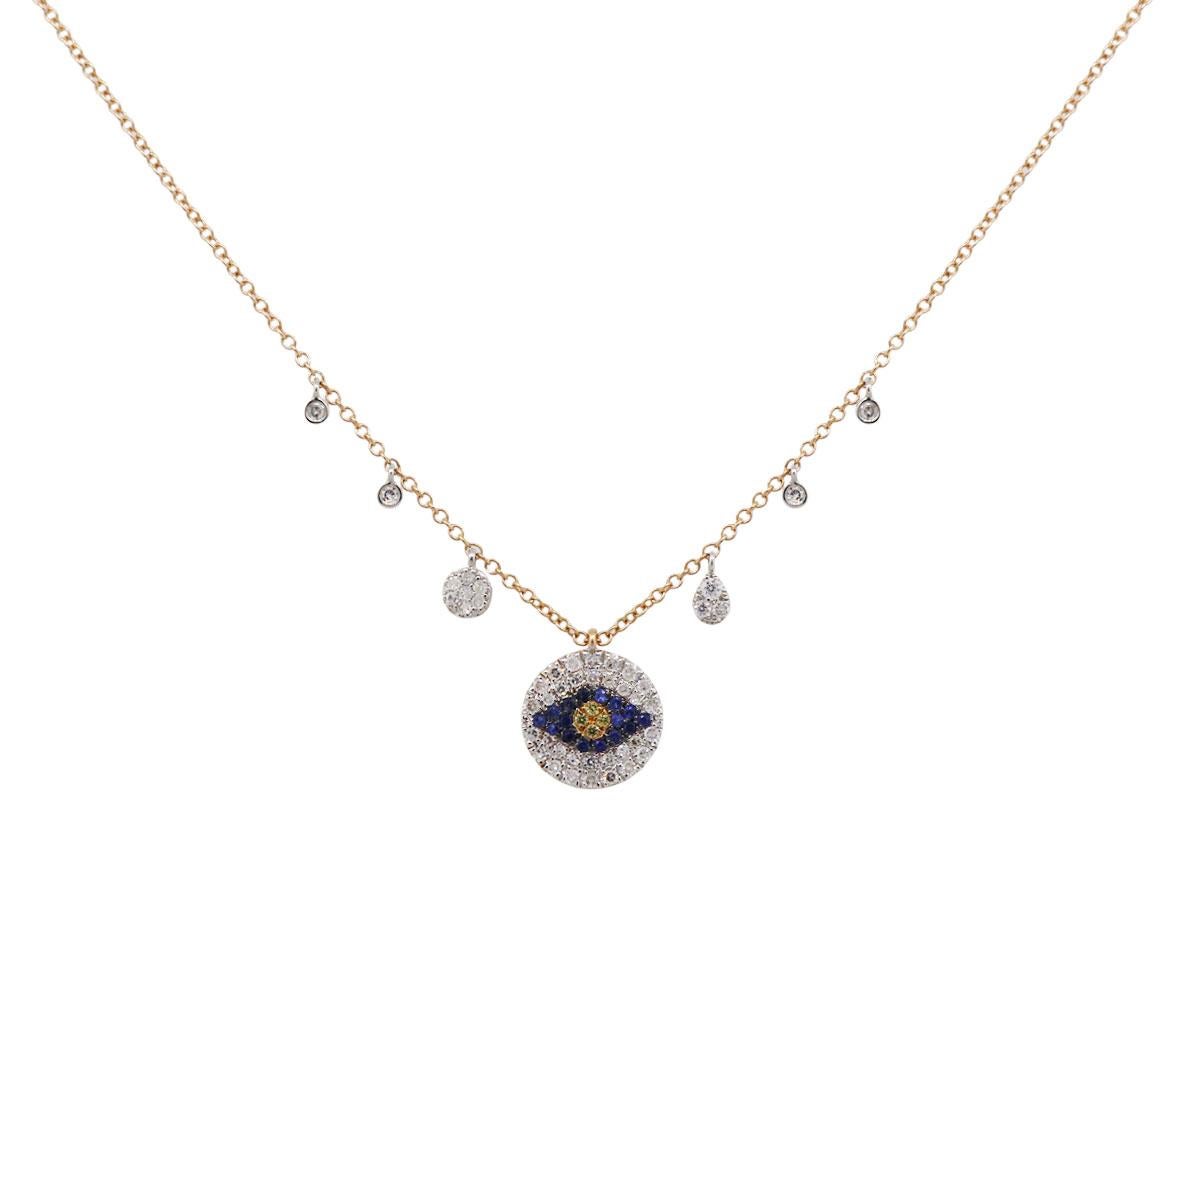 Material: 14k rose gold
Diamond Details: Approximately 0.30ctw of round diamonds. Diamonds are G/H in color and VS in clarity
Gemstone Details: Round shape blue sapphire
Measurements: Necklace measures 16.5″ – 18″
Pendant Measurements: 0.40″ x 0.04″